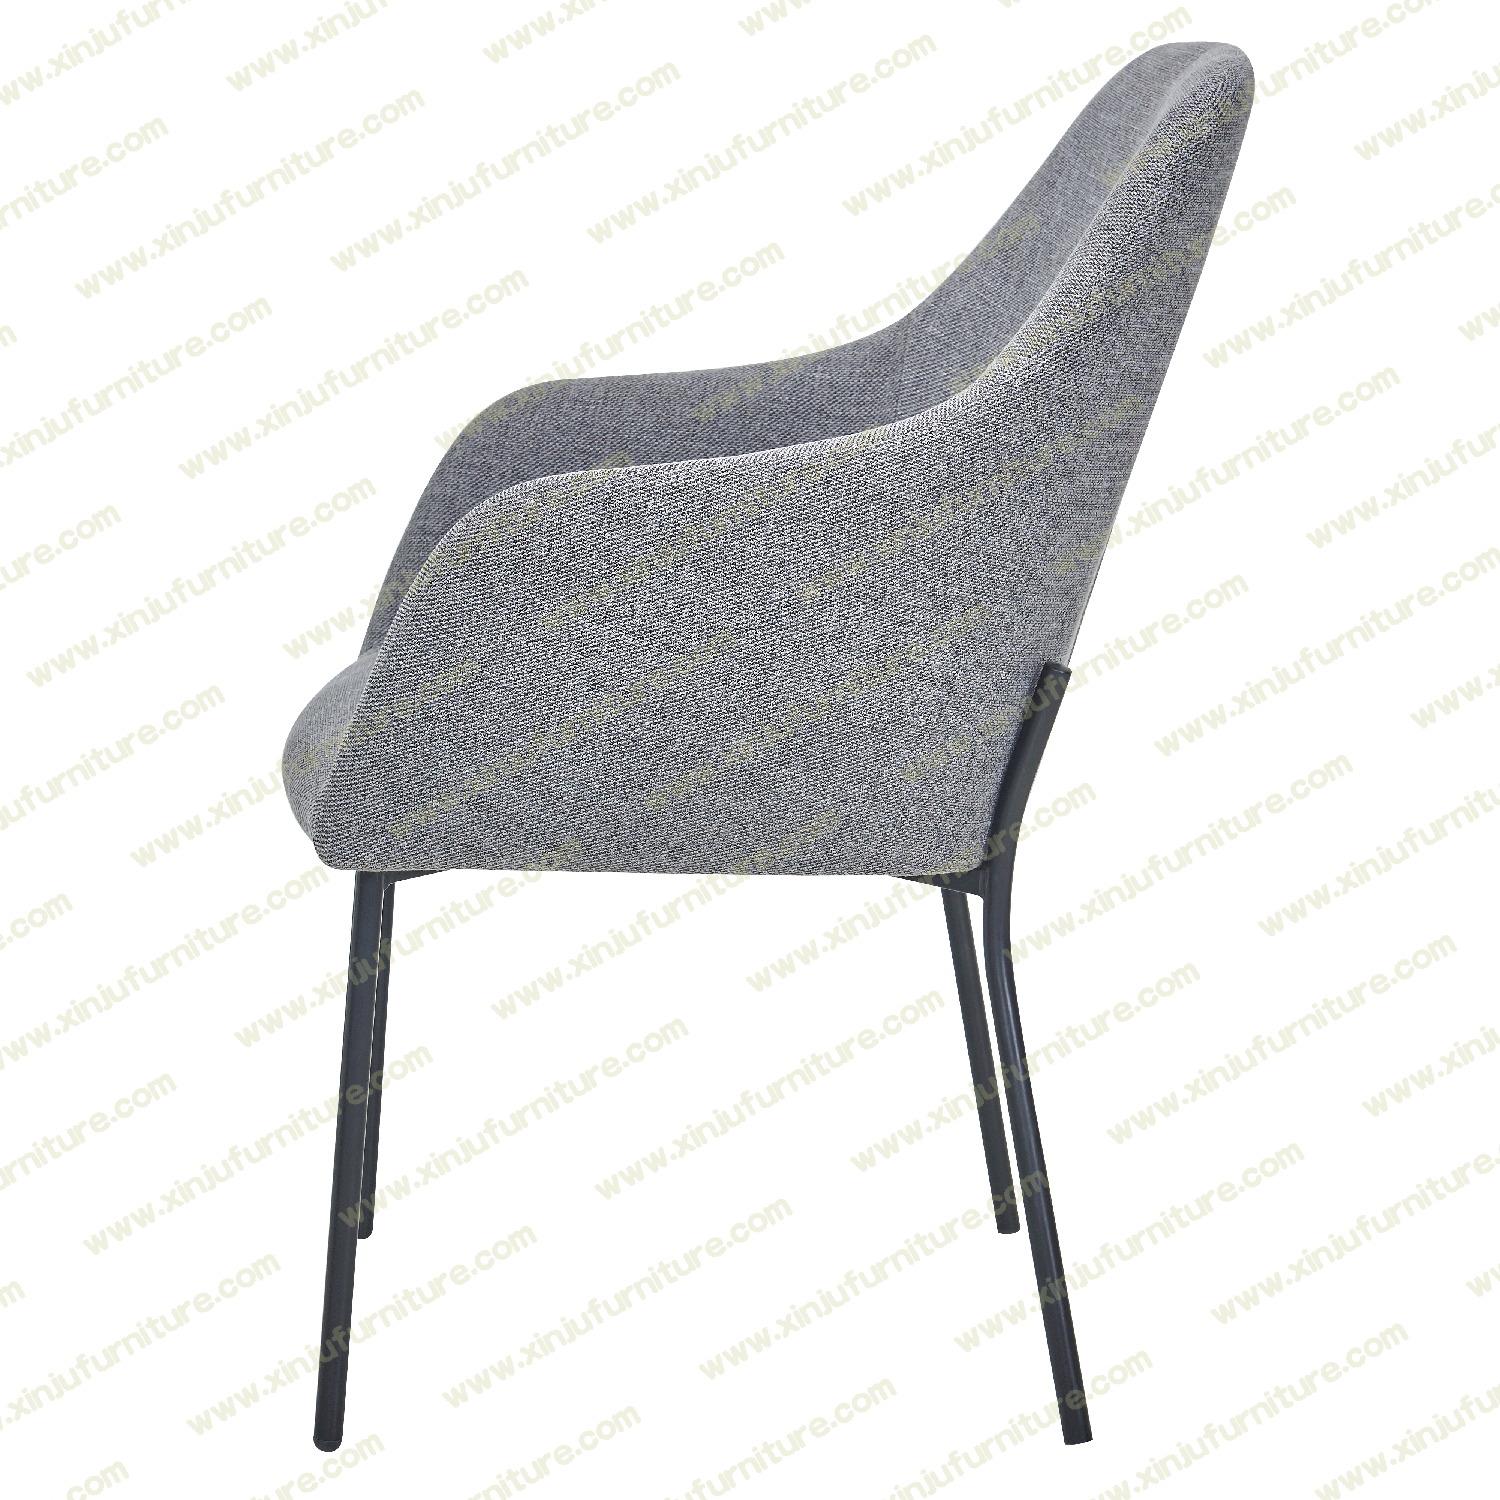 High back grey dining chair